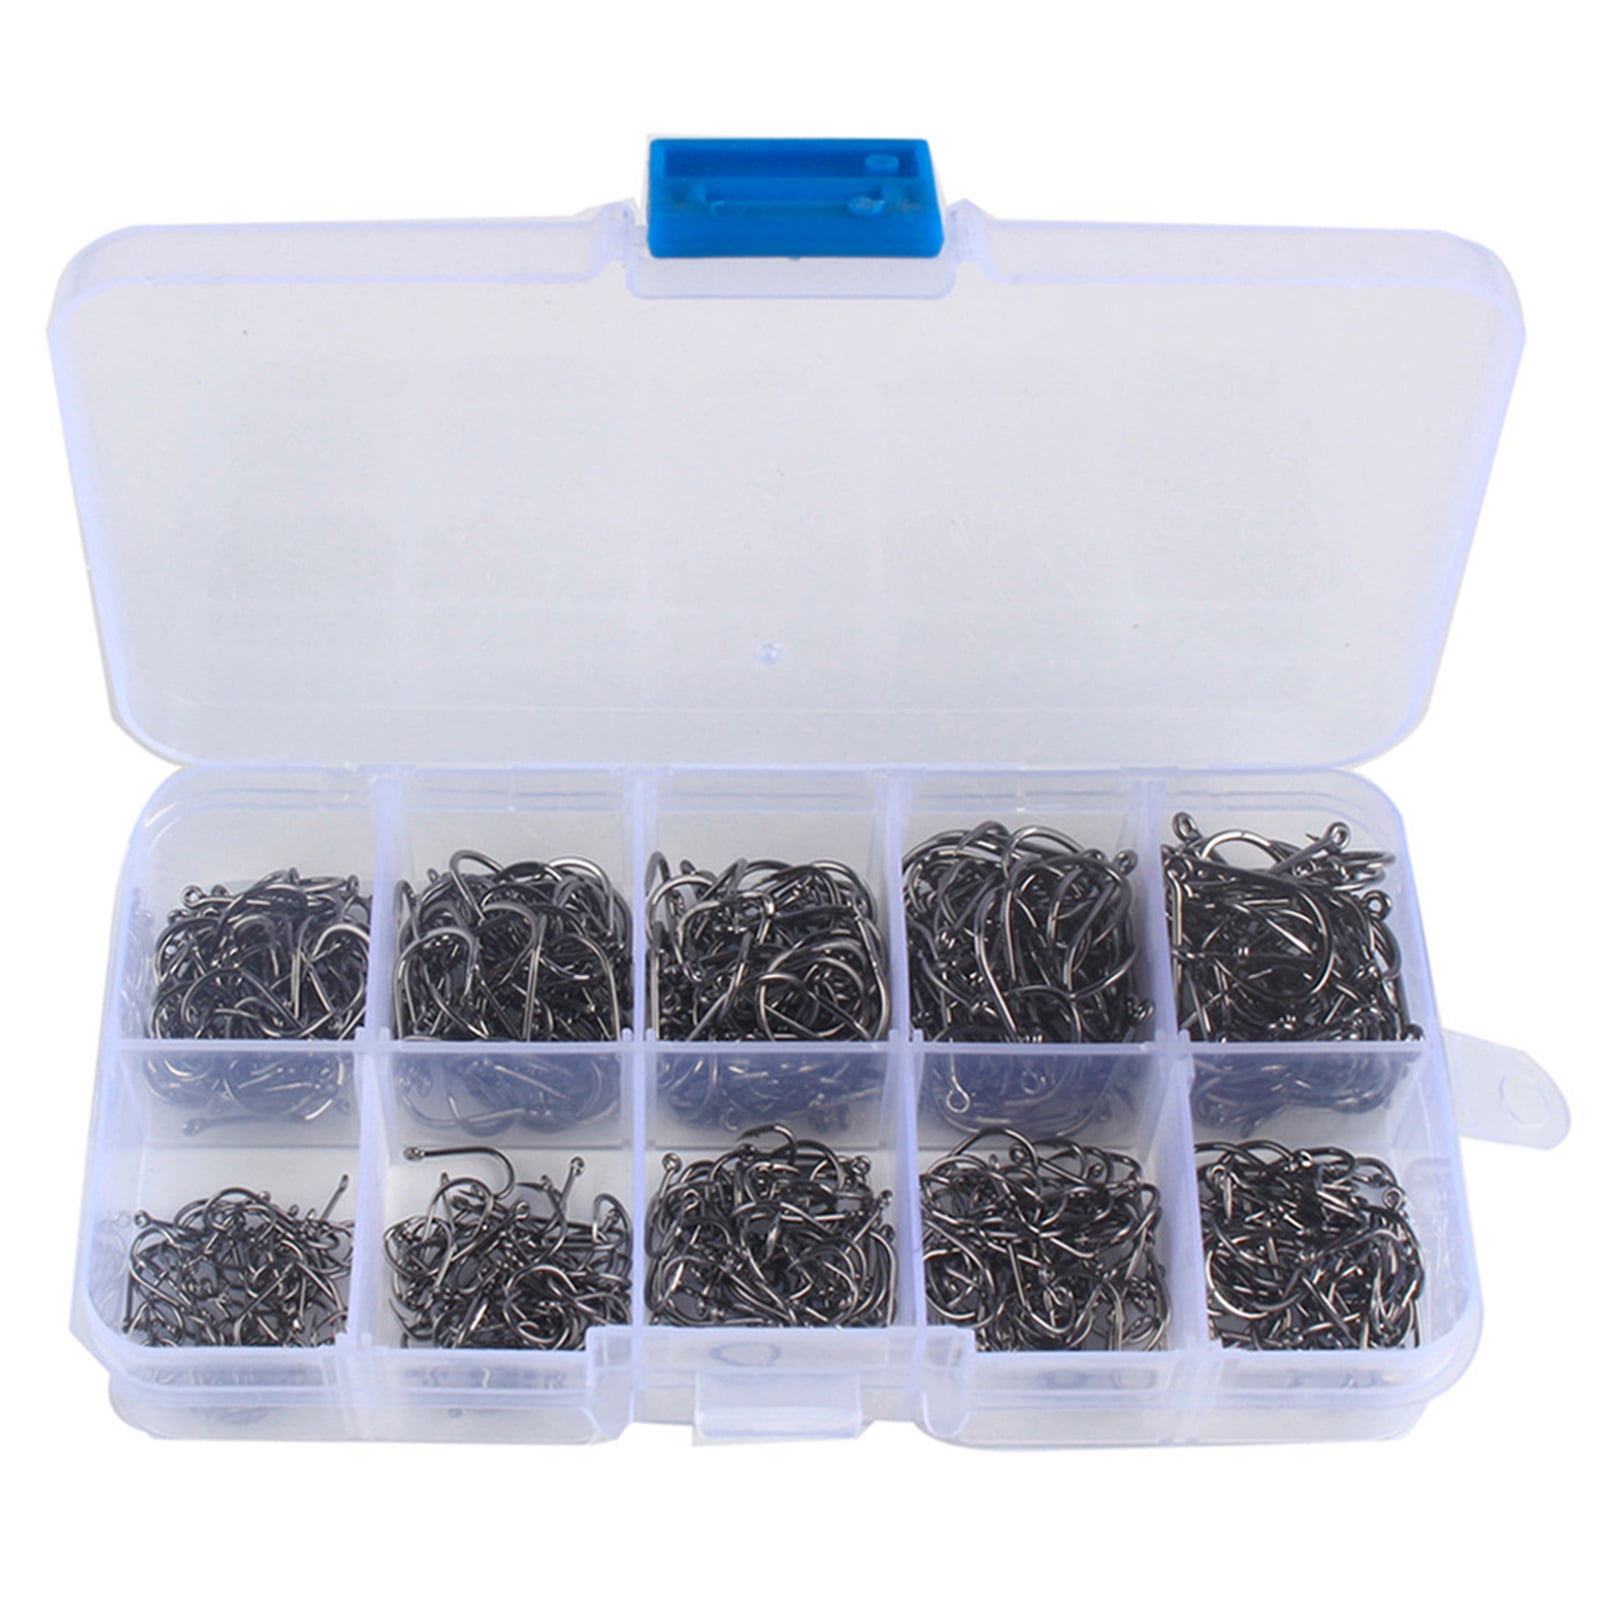 10-100Pcs Plastic Fishing Hook Secure Keeper Holder Lure Accessories Jig  Hooks Safe Keeping For Fishing Rod Tool Bait Casting